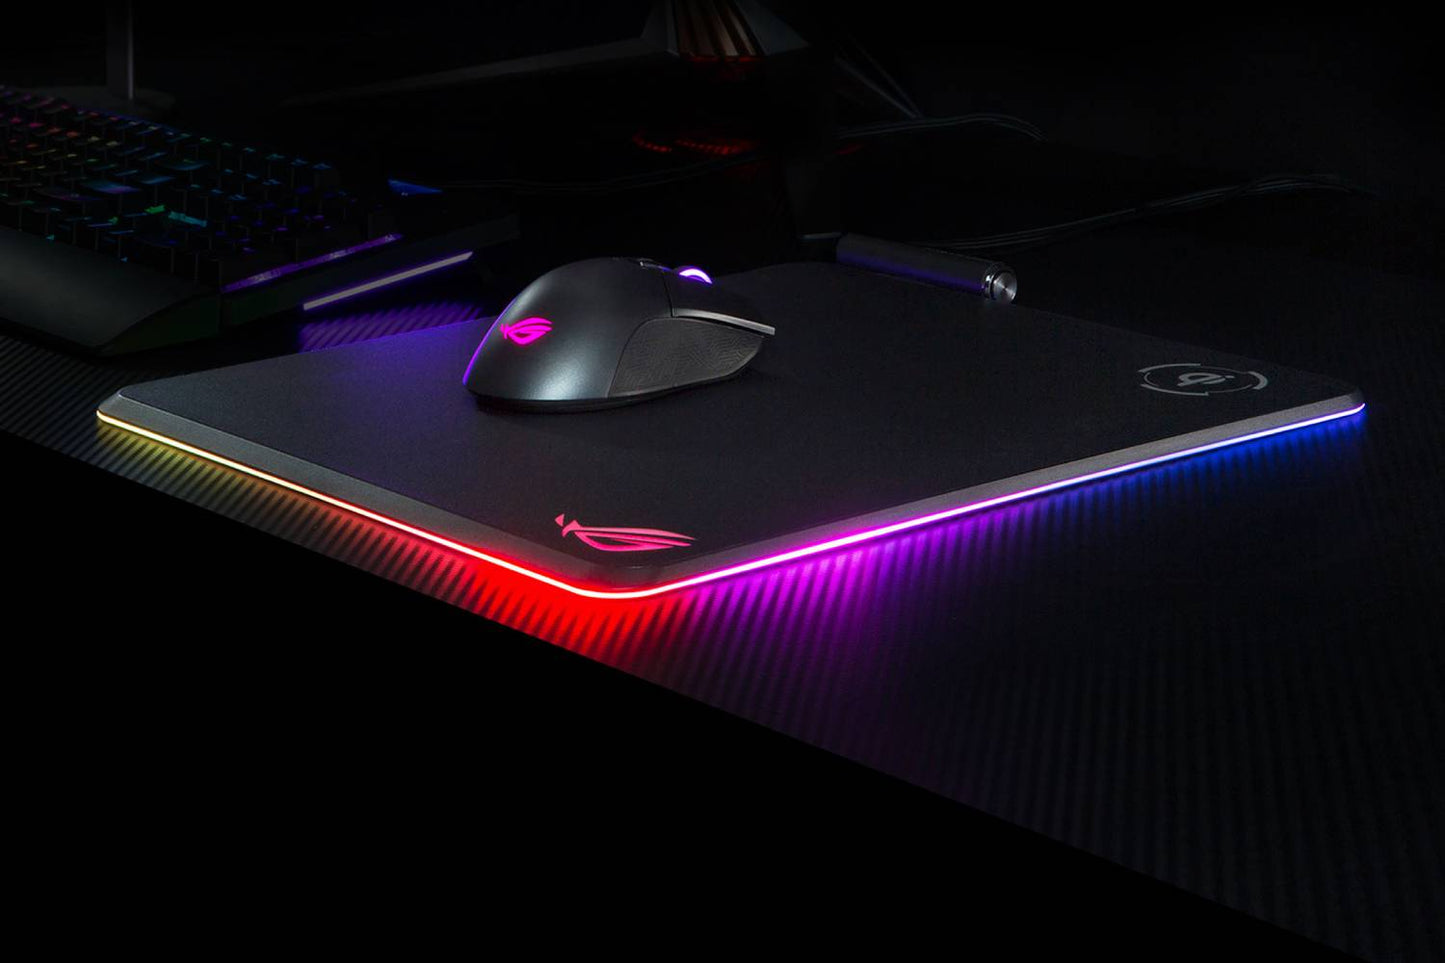 Asus ROG Balteus Qi wireless-charging RGB gaming mouse pad with 15-zone Aura Sync lighting, portrait hard surface, USB passthrough and nonslip base